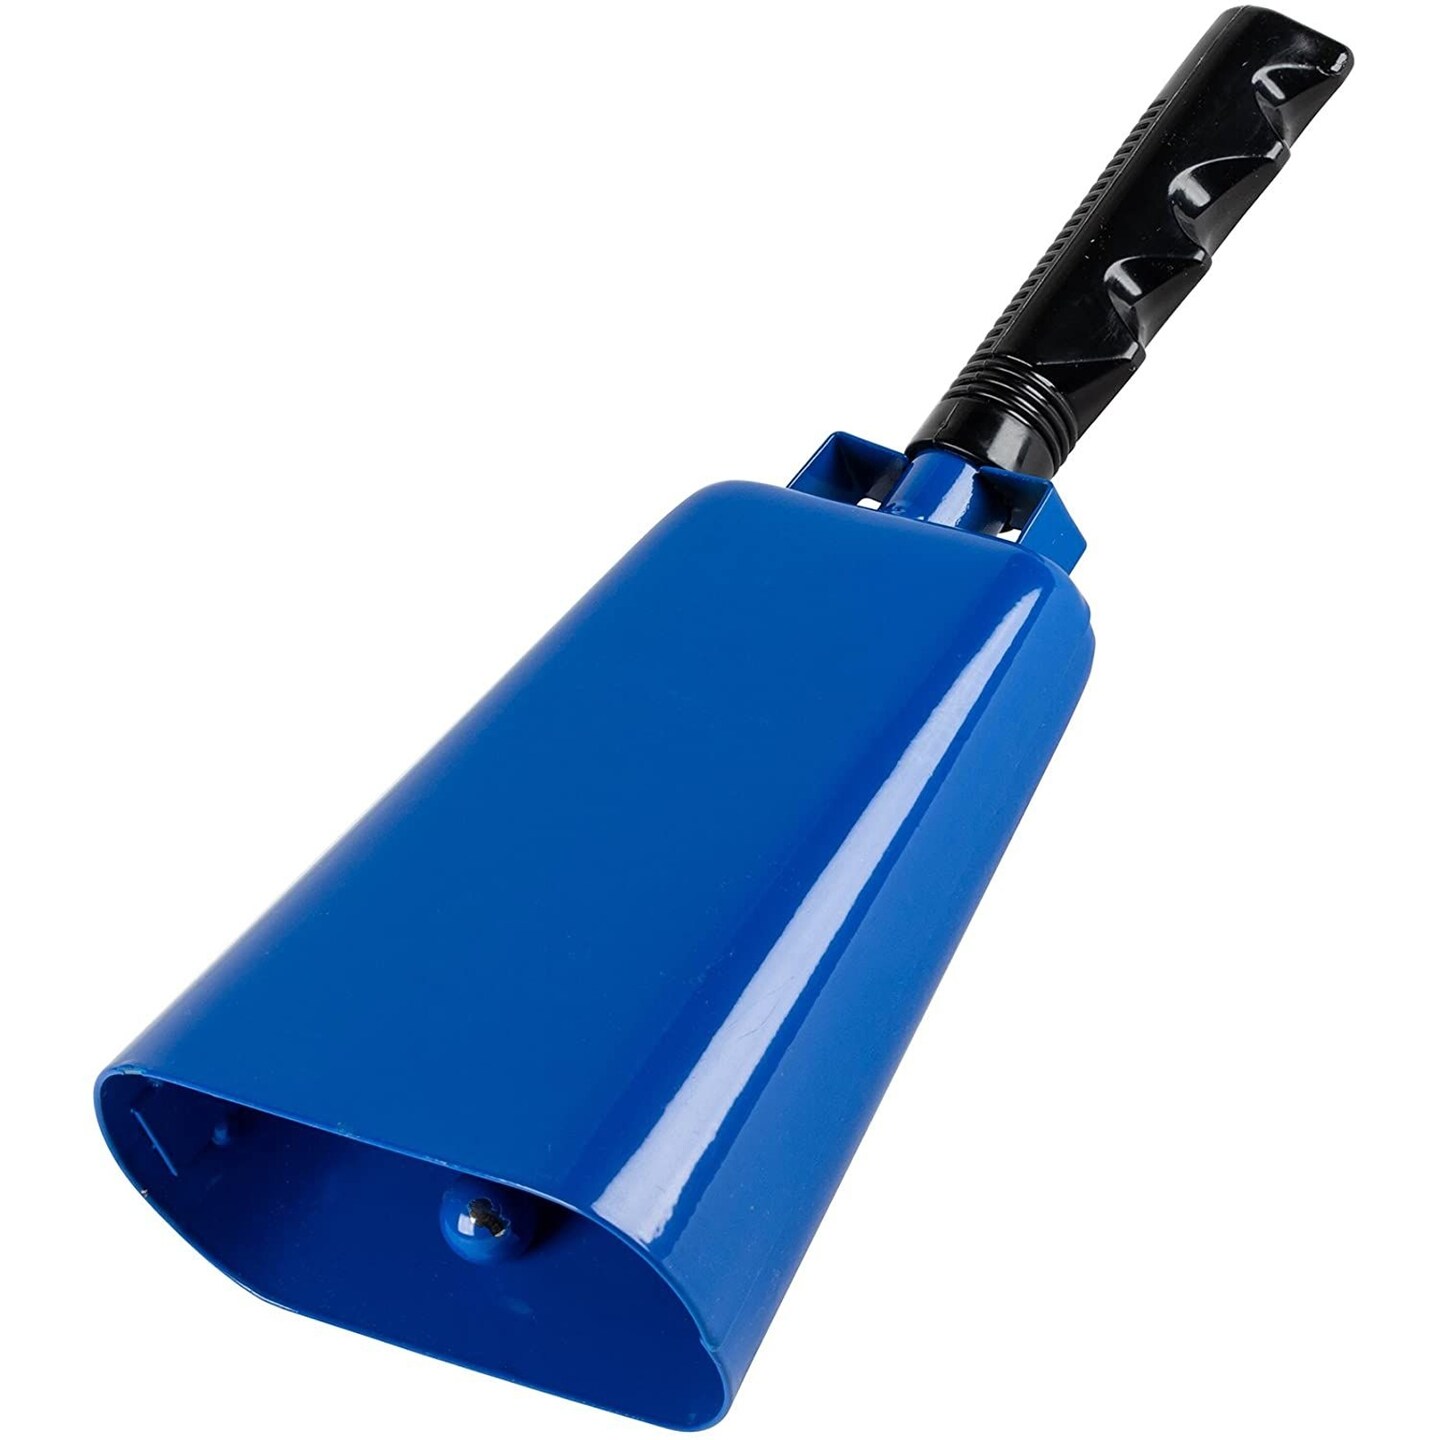 Cowbell with Handle - Cow Bell Noisemakers, Loud Call Bell for Cheers,  Sports Games, Weddings, Farm, Blue, 4.75 x 11 x 2.375 Inches